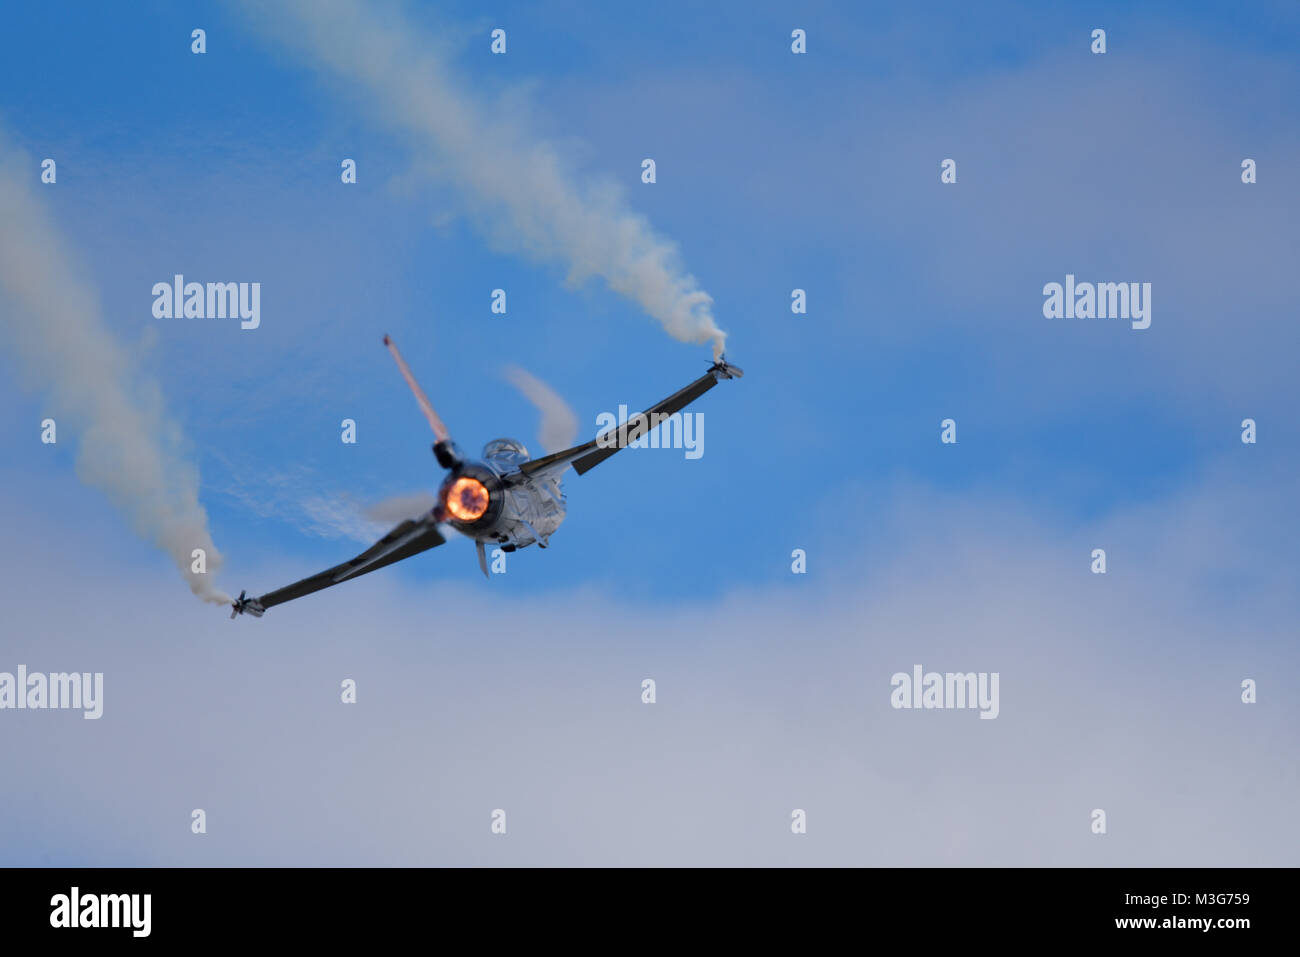 Belgian Air Force Lockheed F16 Fighting Falcon at the Royal International Air Tattoo Fairford Afterburner re-heat Belgian Air Component Space for copy Stock Photo